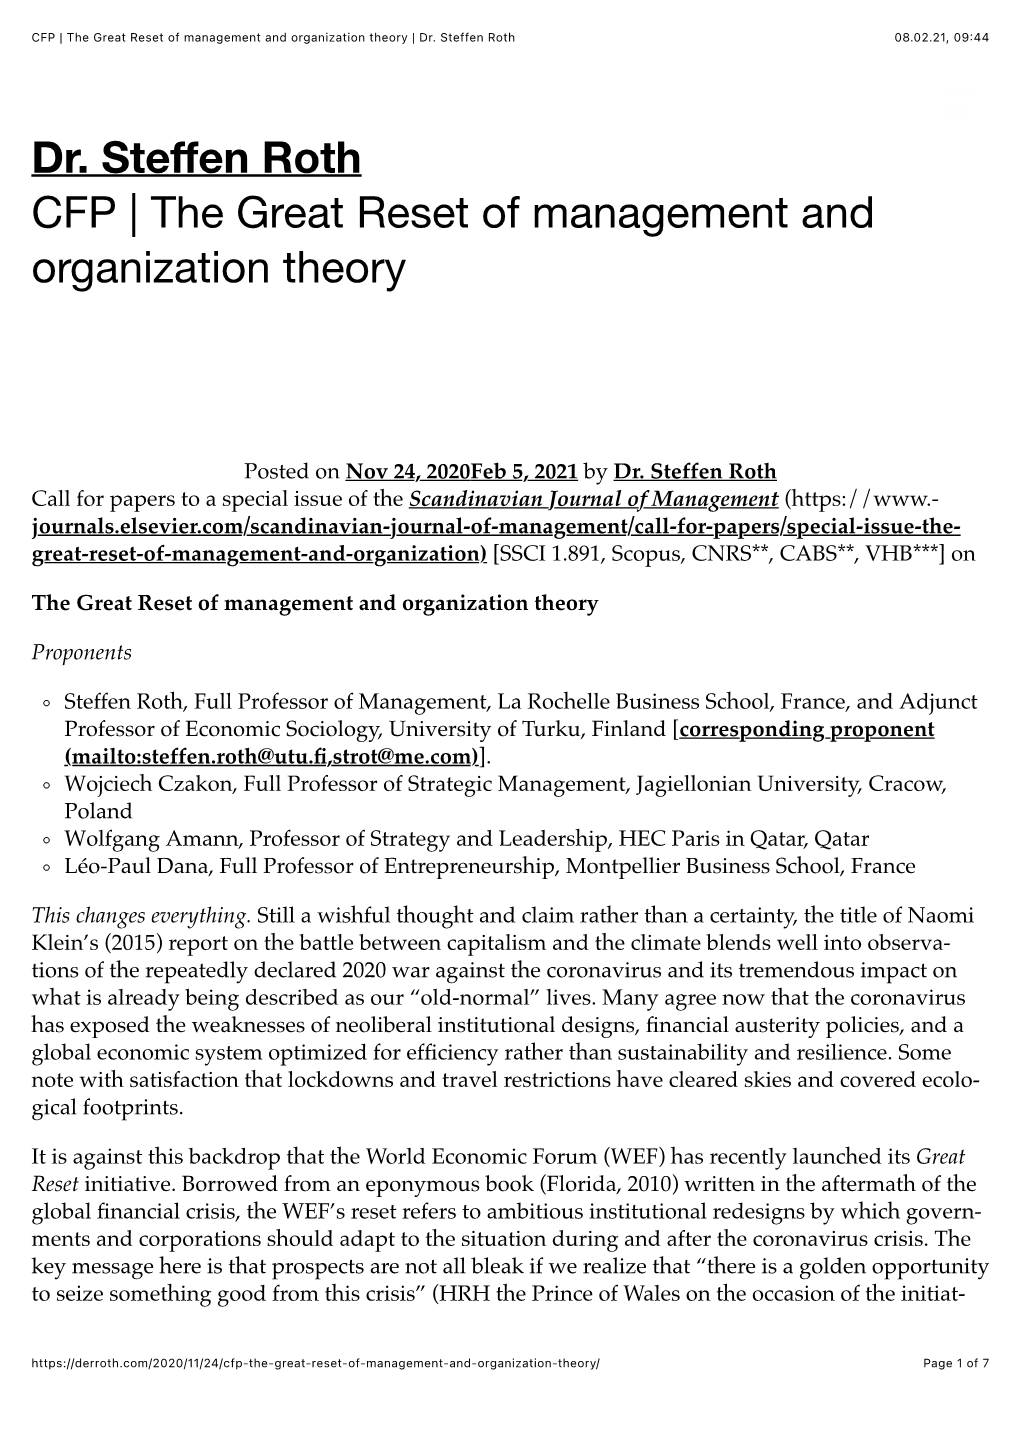 CFP | the Great Reset of Management and Organization Theory | Dr. Steffen Roth 08.02.21, 09:44